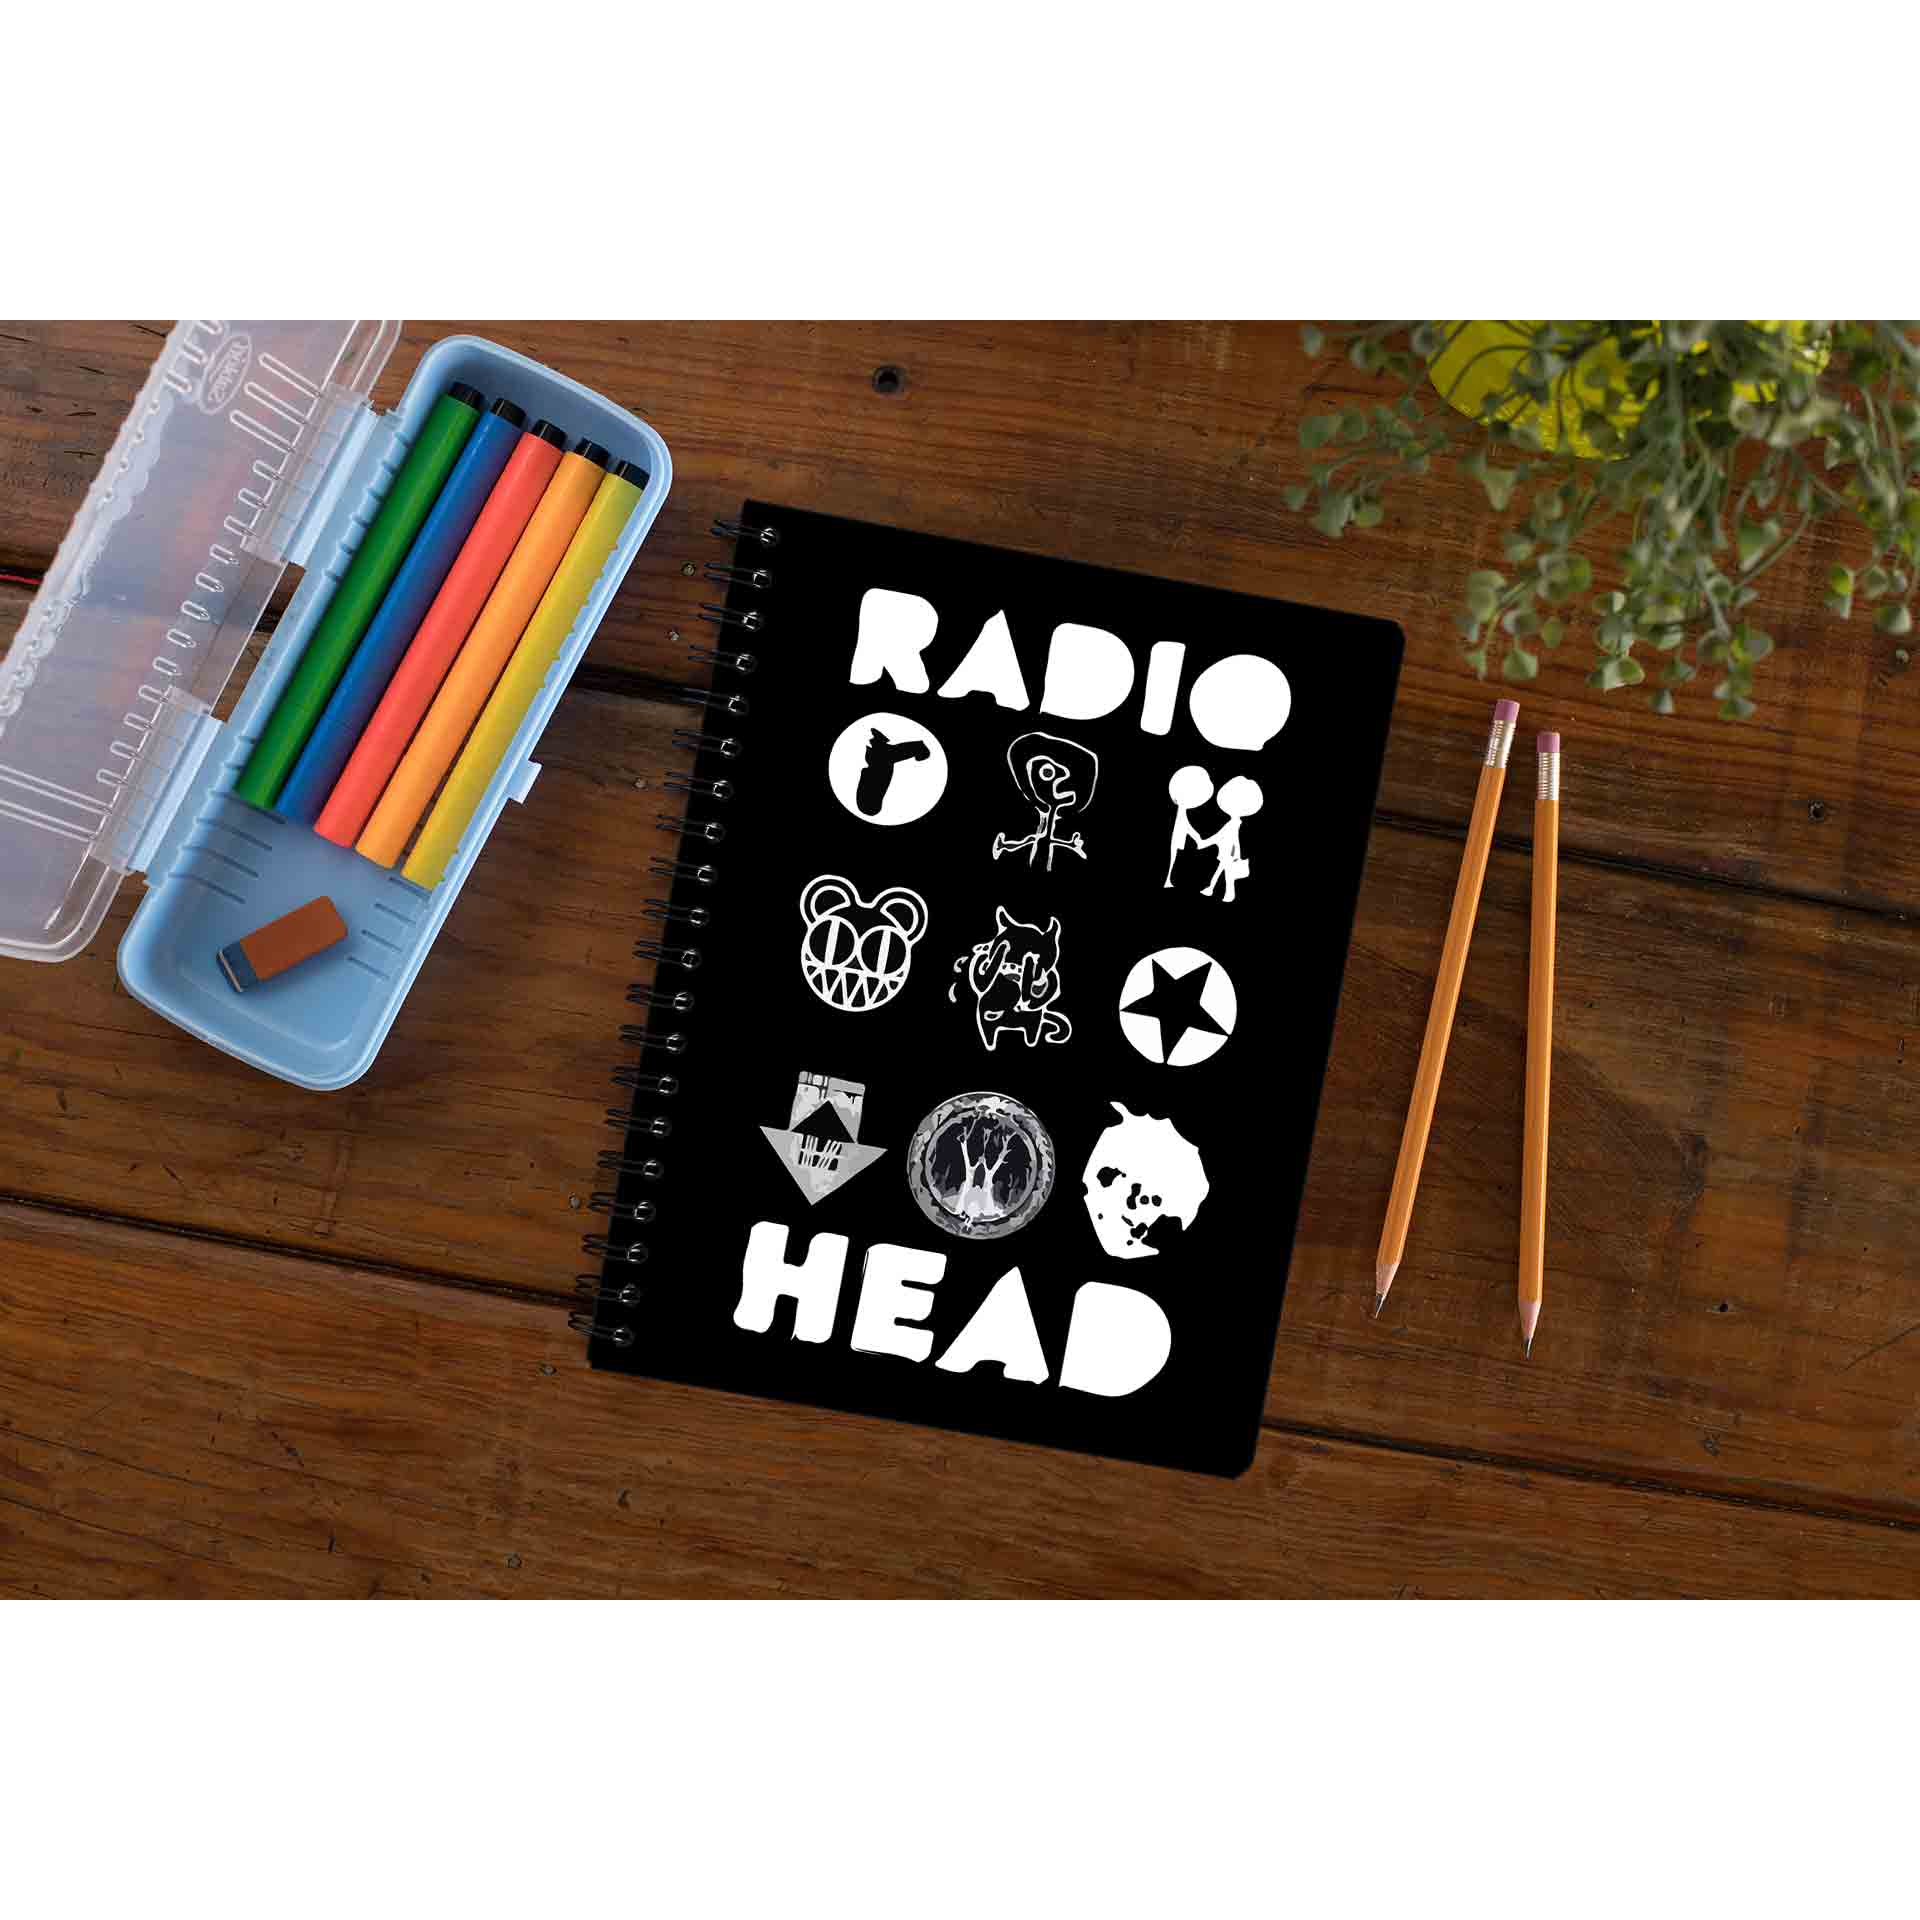 radiohead album arts notebook notepad diary buy online india the banyan tee tbt unruled